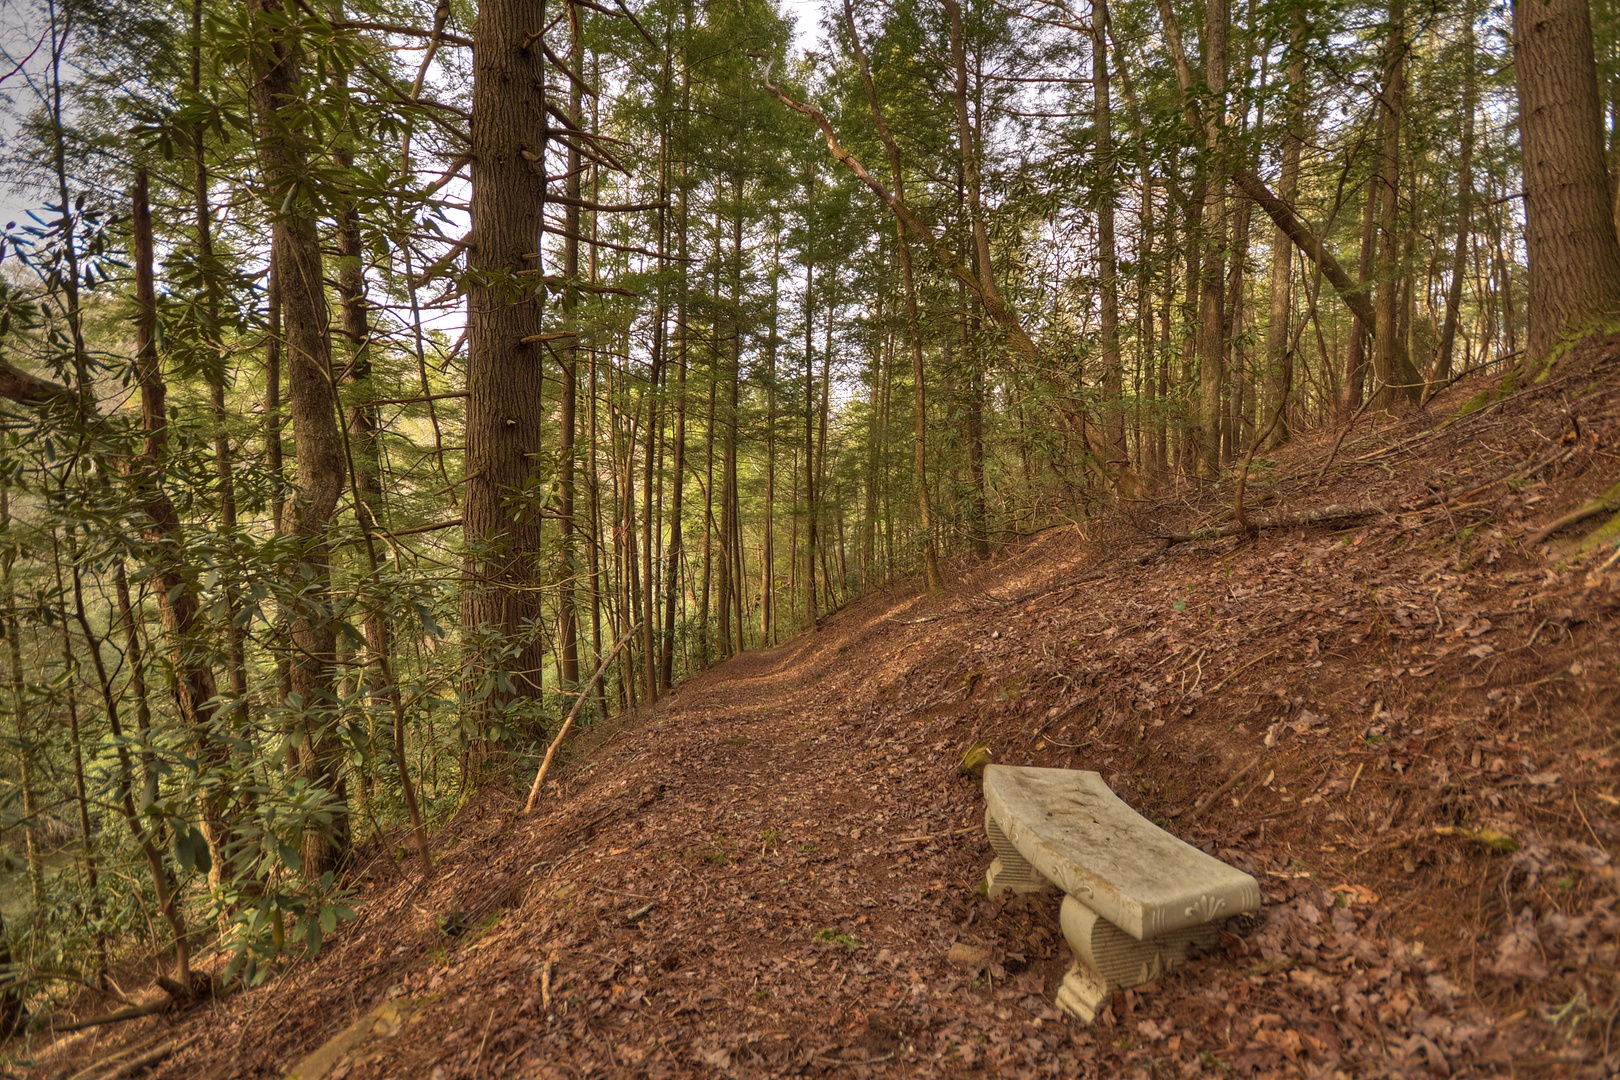 Reel Creek Lodge- Bench seating along the trail way